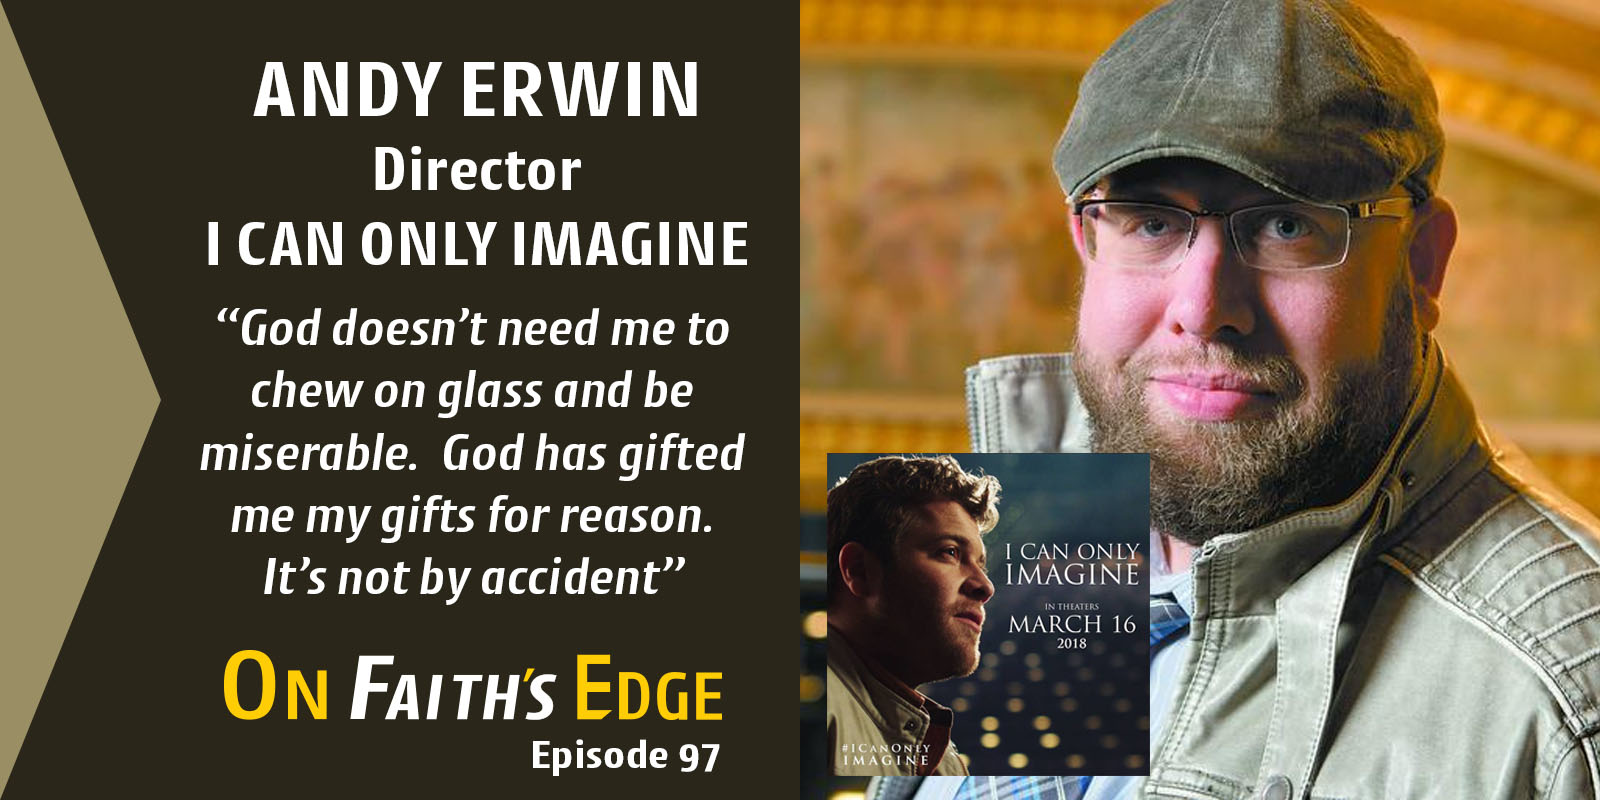 I CAN ONLY IMAGINE – Movie Director, Andrew Erwin | Episode 97